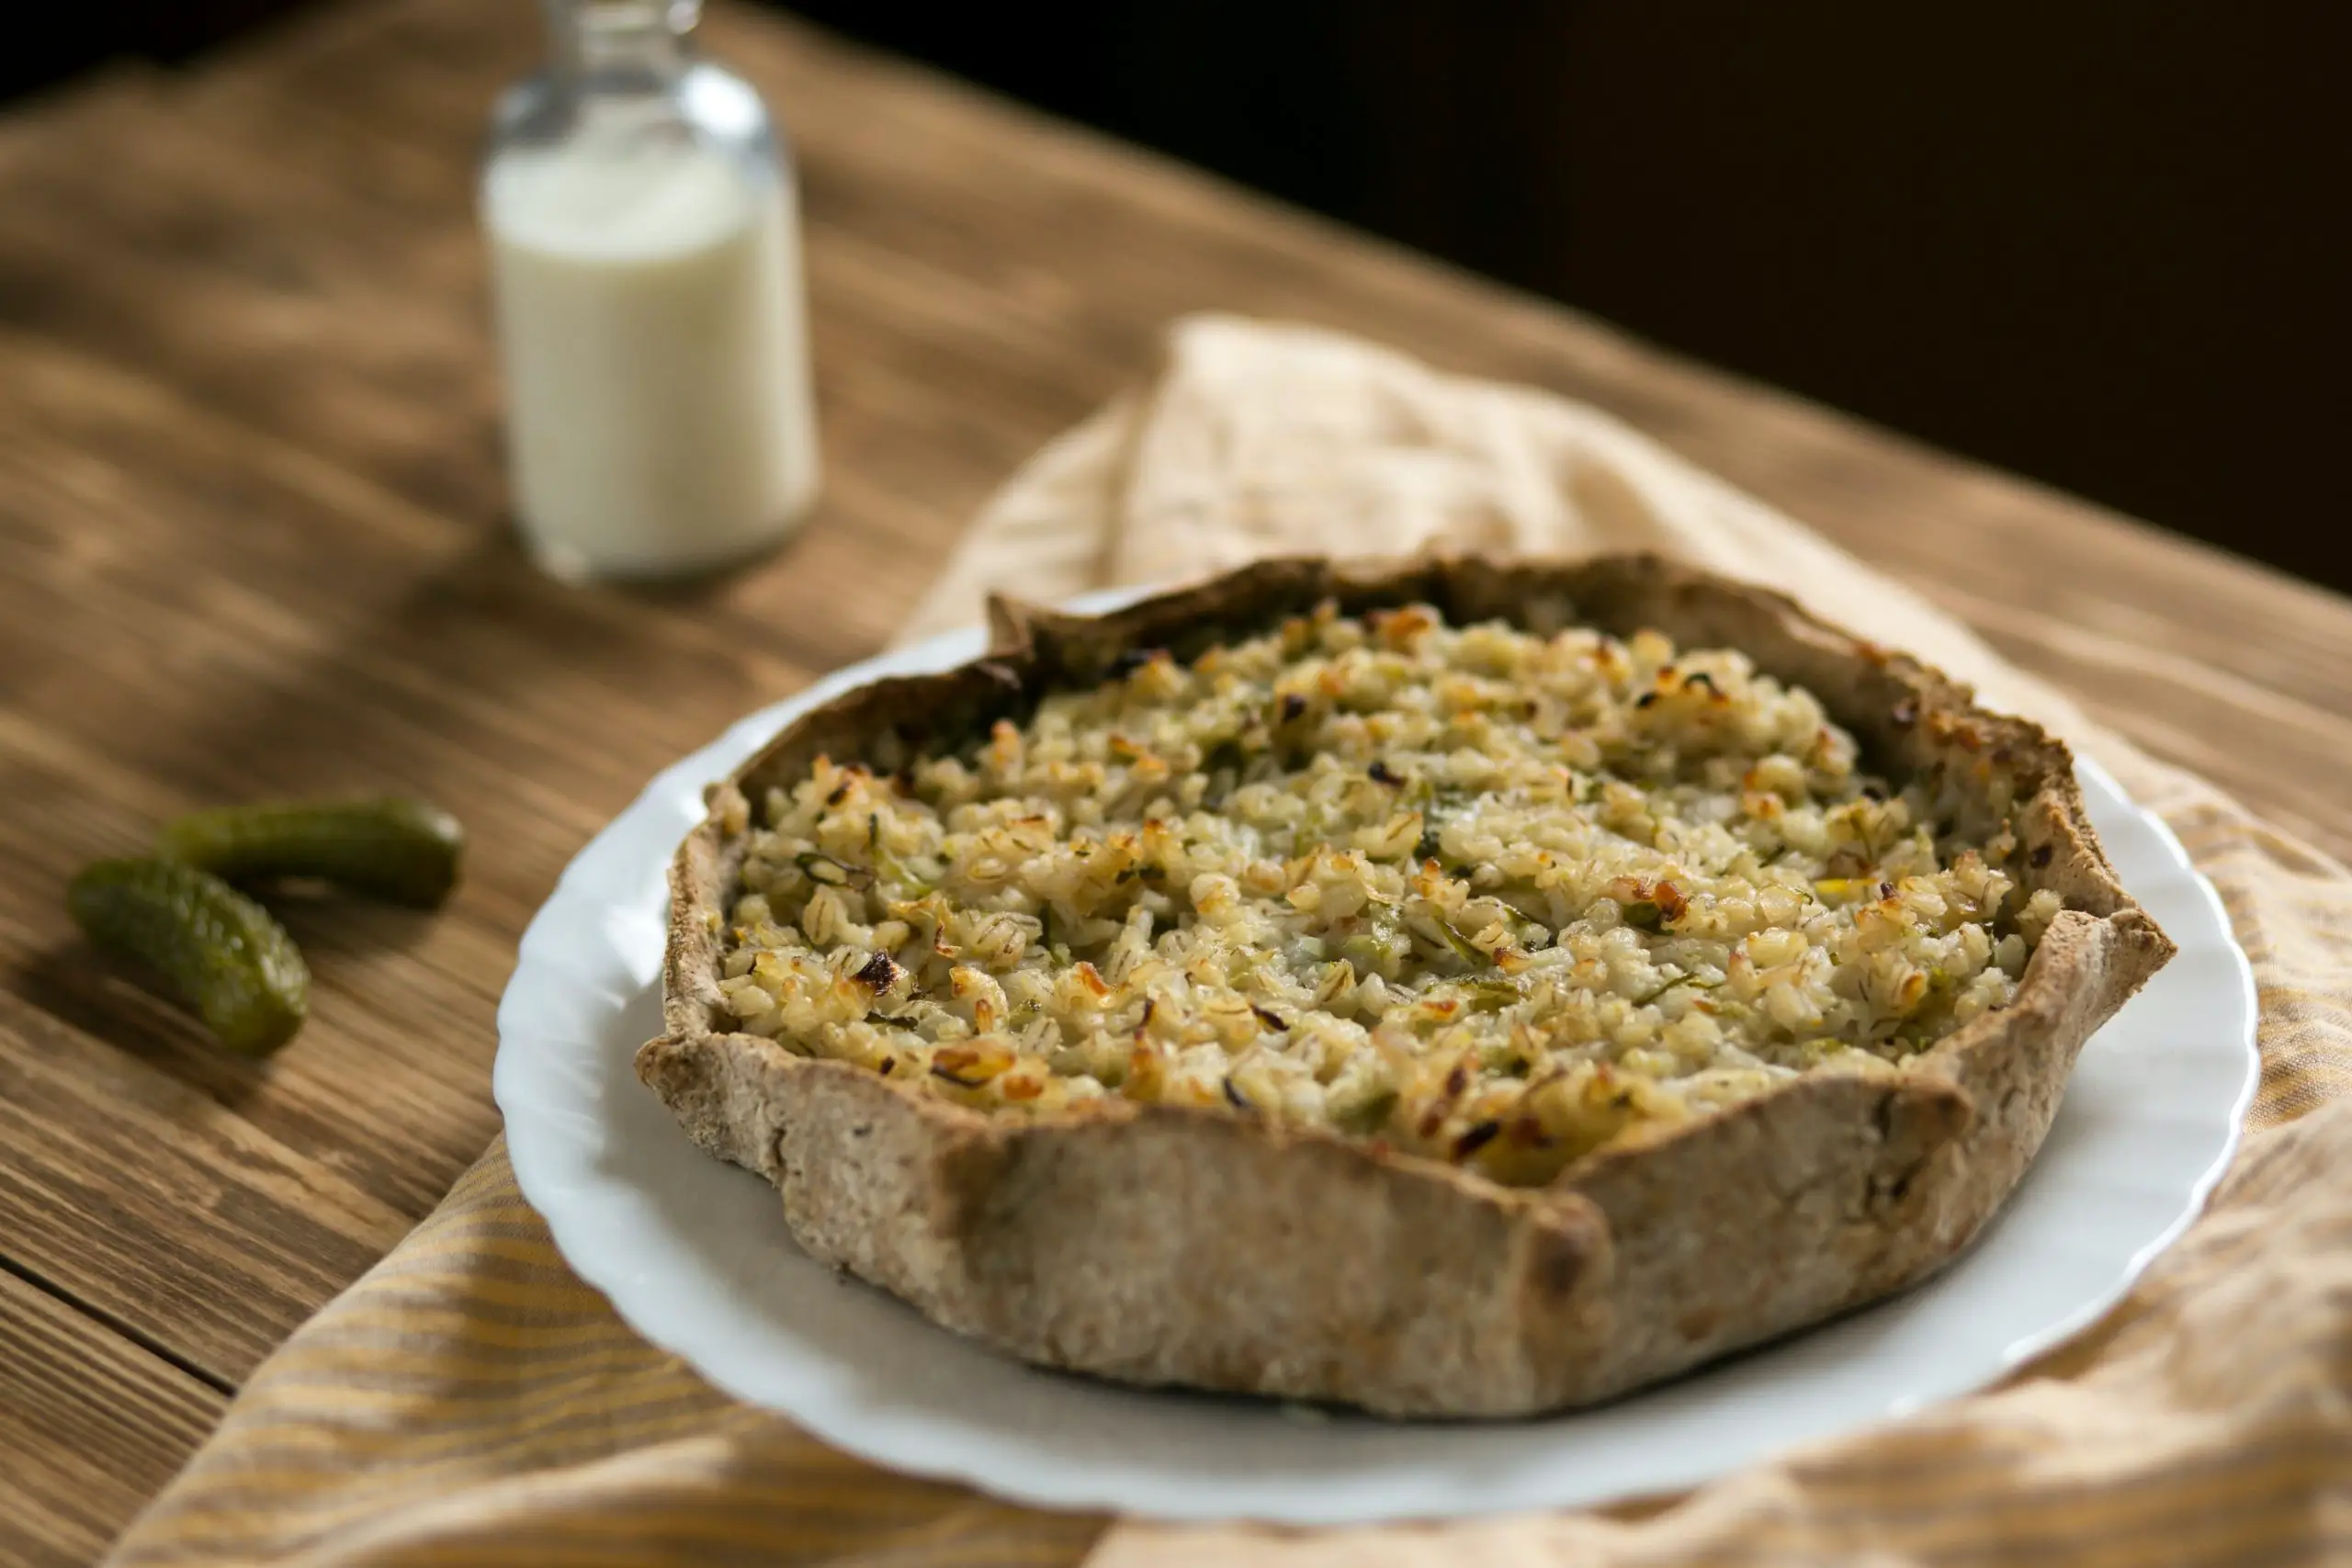 How to Reheat Quiche?